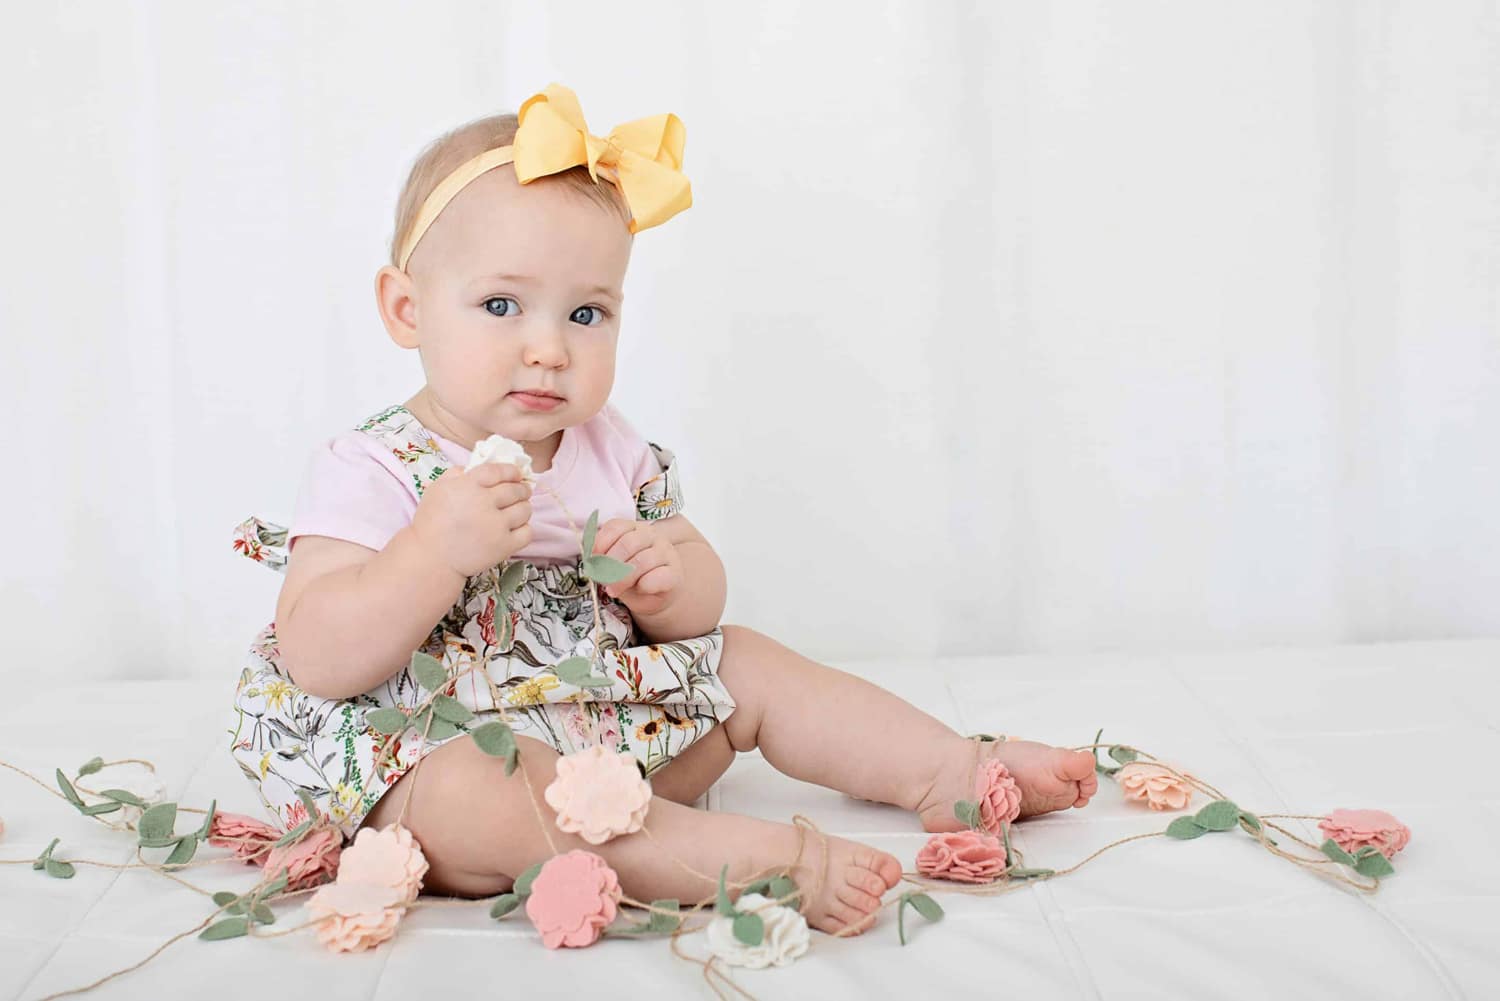 Baby in floral dress holding garland.